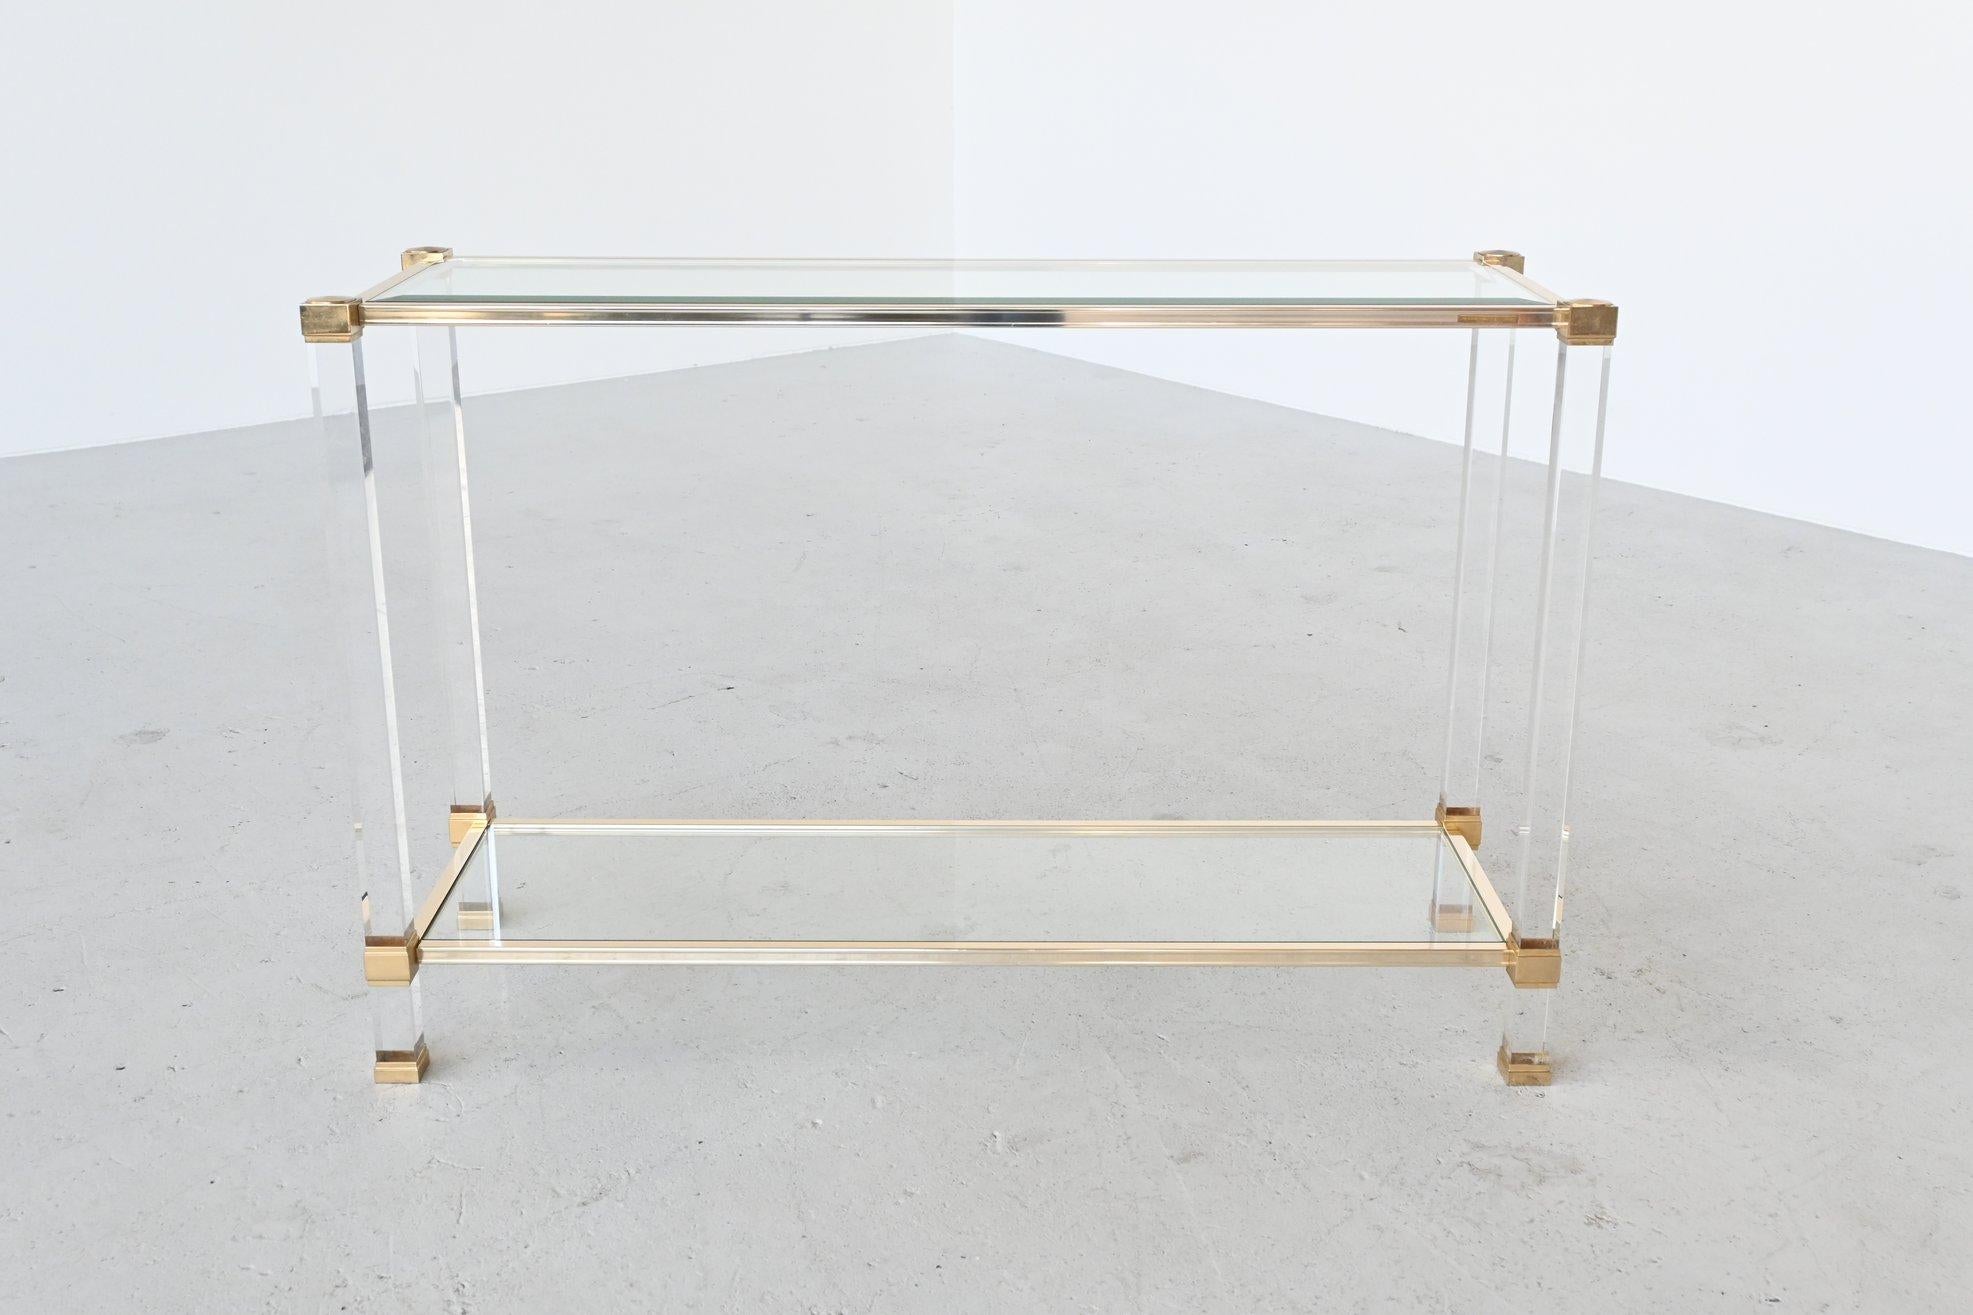 Beautiful high console table designed by Pierre Vandel, France, 1970. This double level table is made of Lucite pillars with brass connections that support 2 glass plates. It’s very decorative and practical to use. The table is marked with a brass